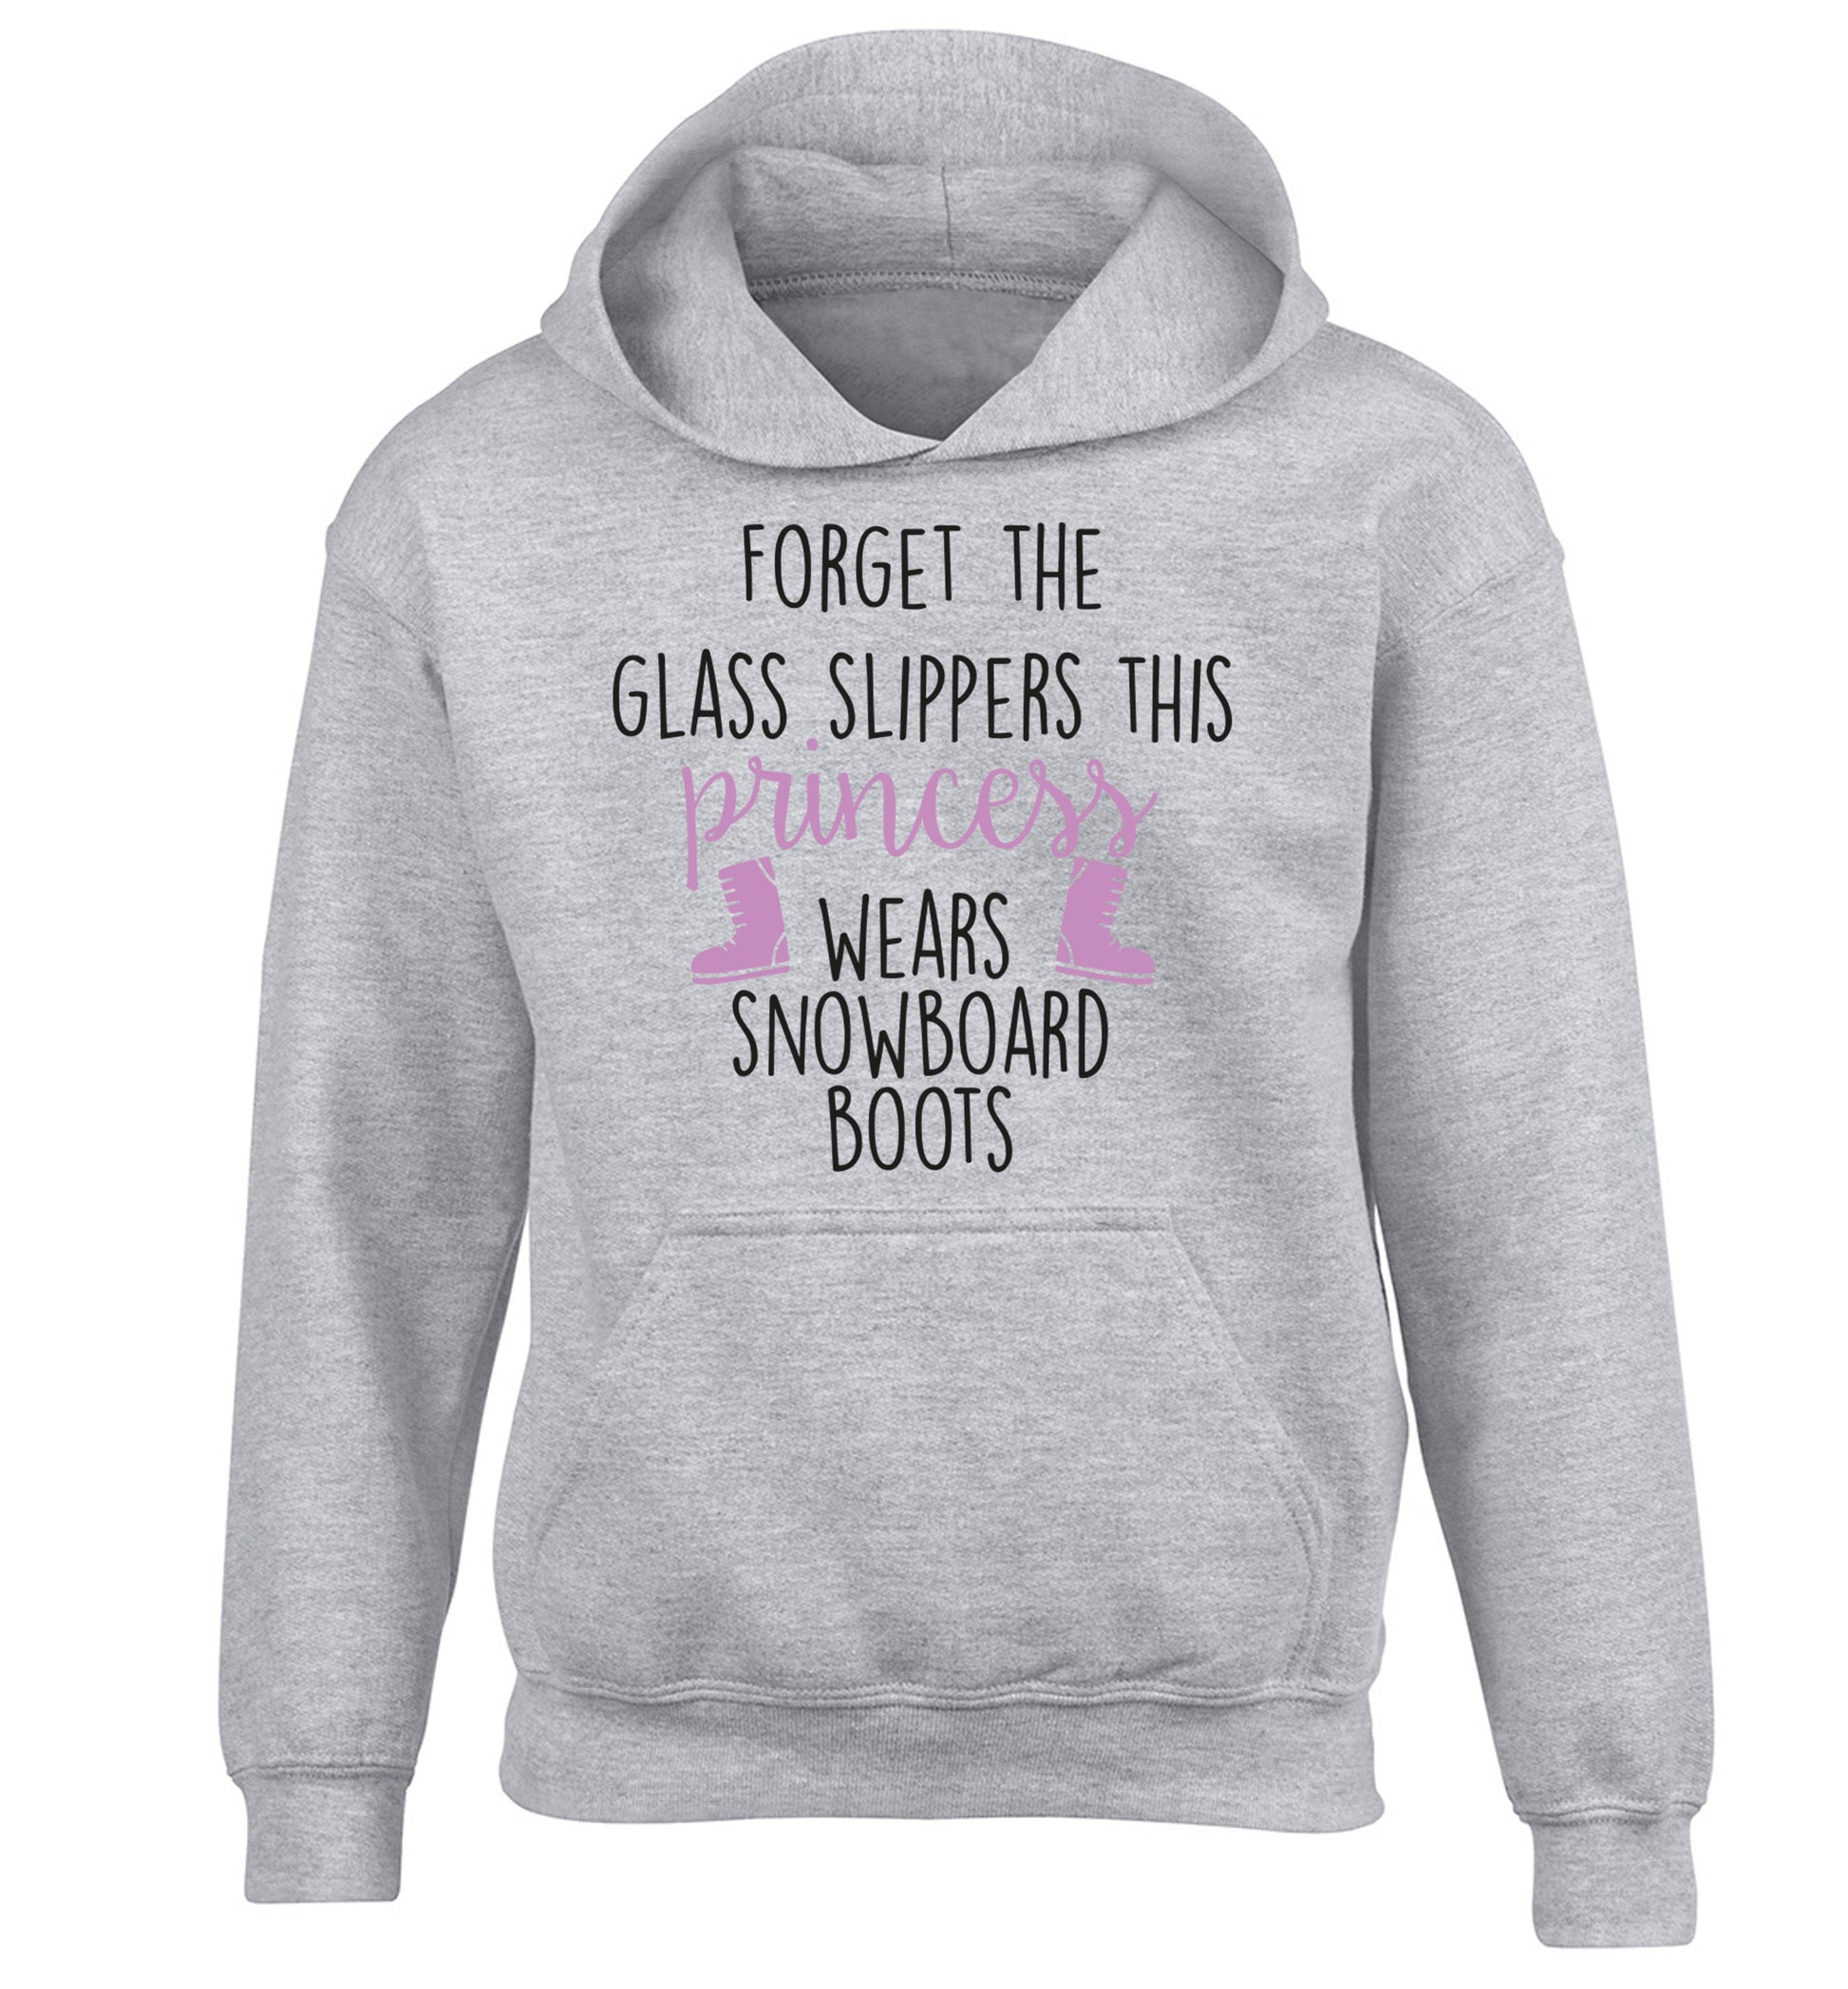 Forget the glass slippers this princess wears snowboard boots children's grey hoodie 12-14 Years